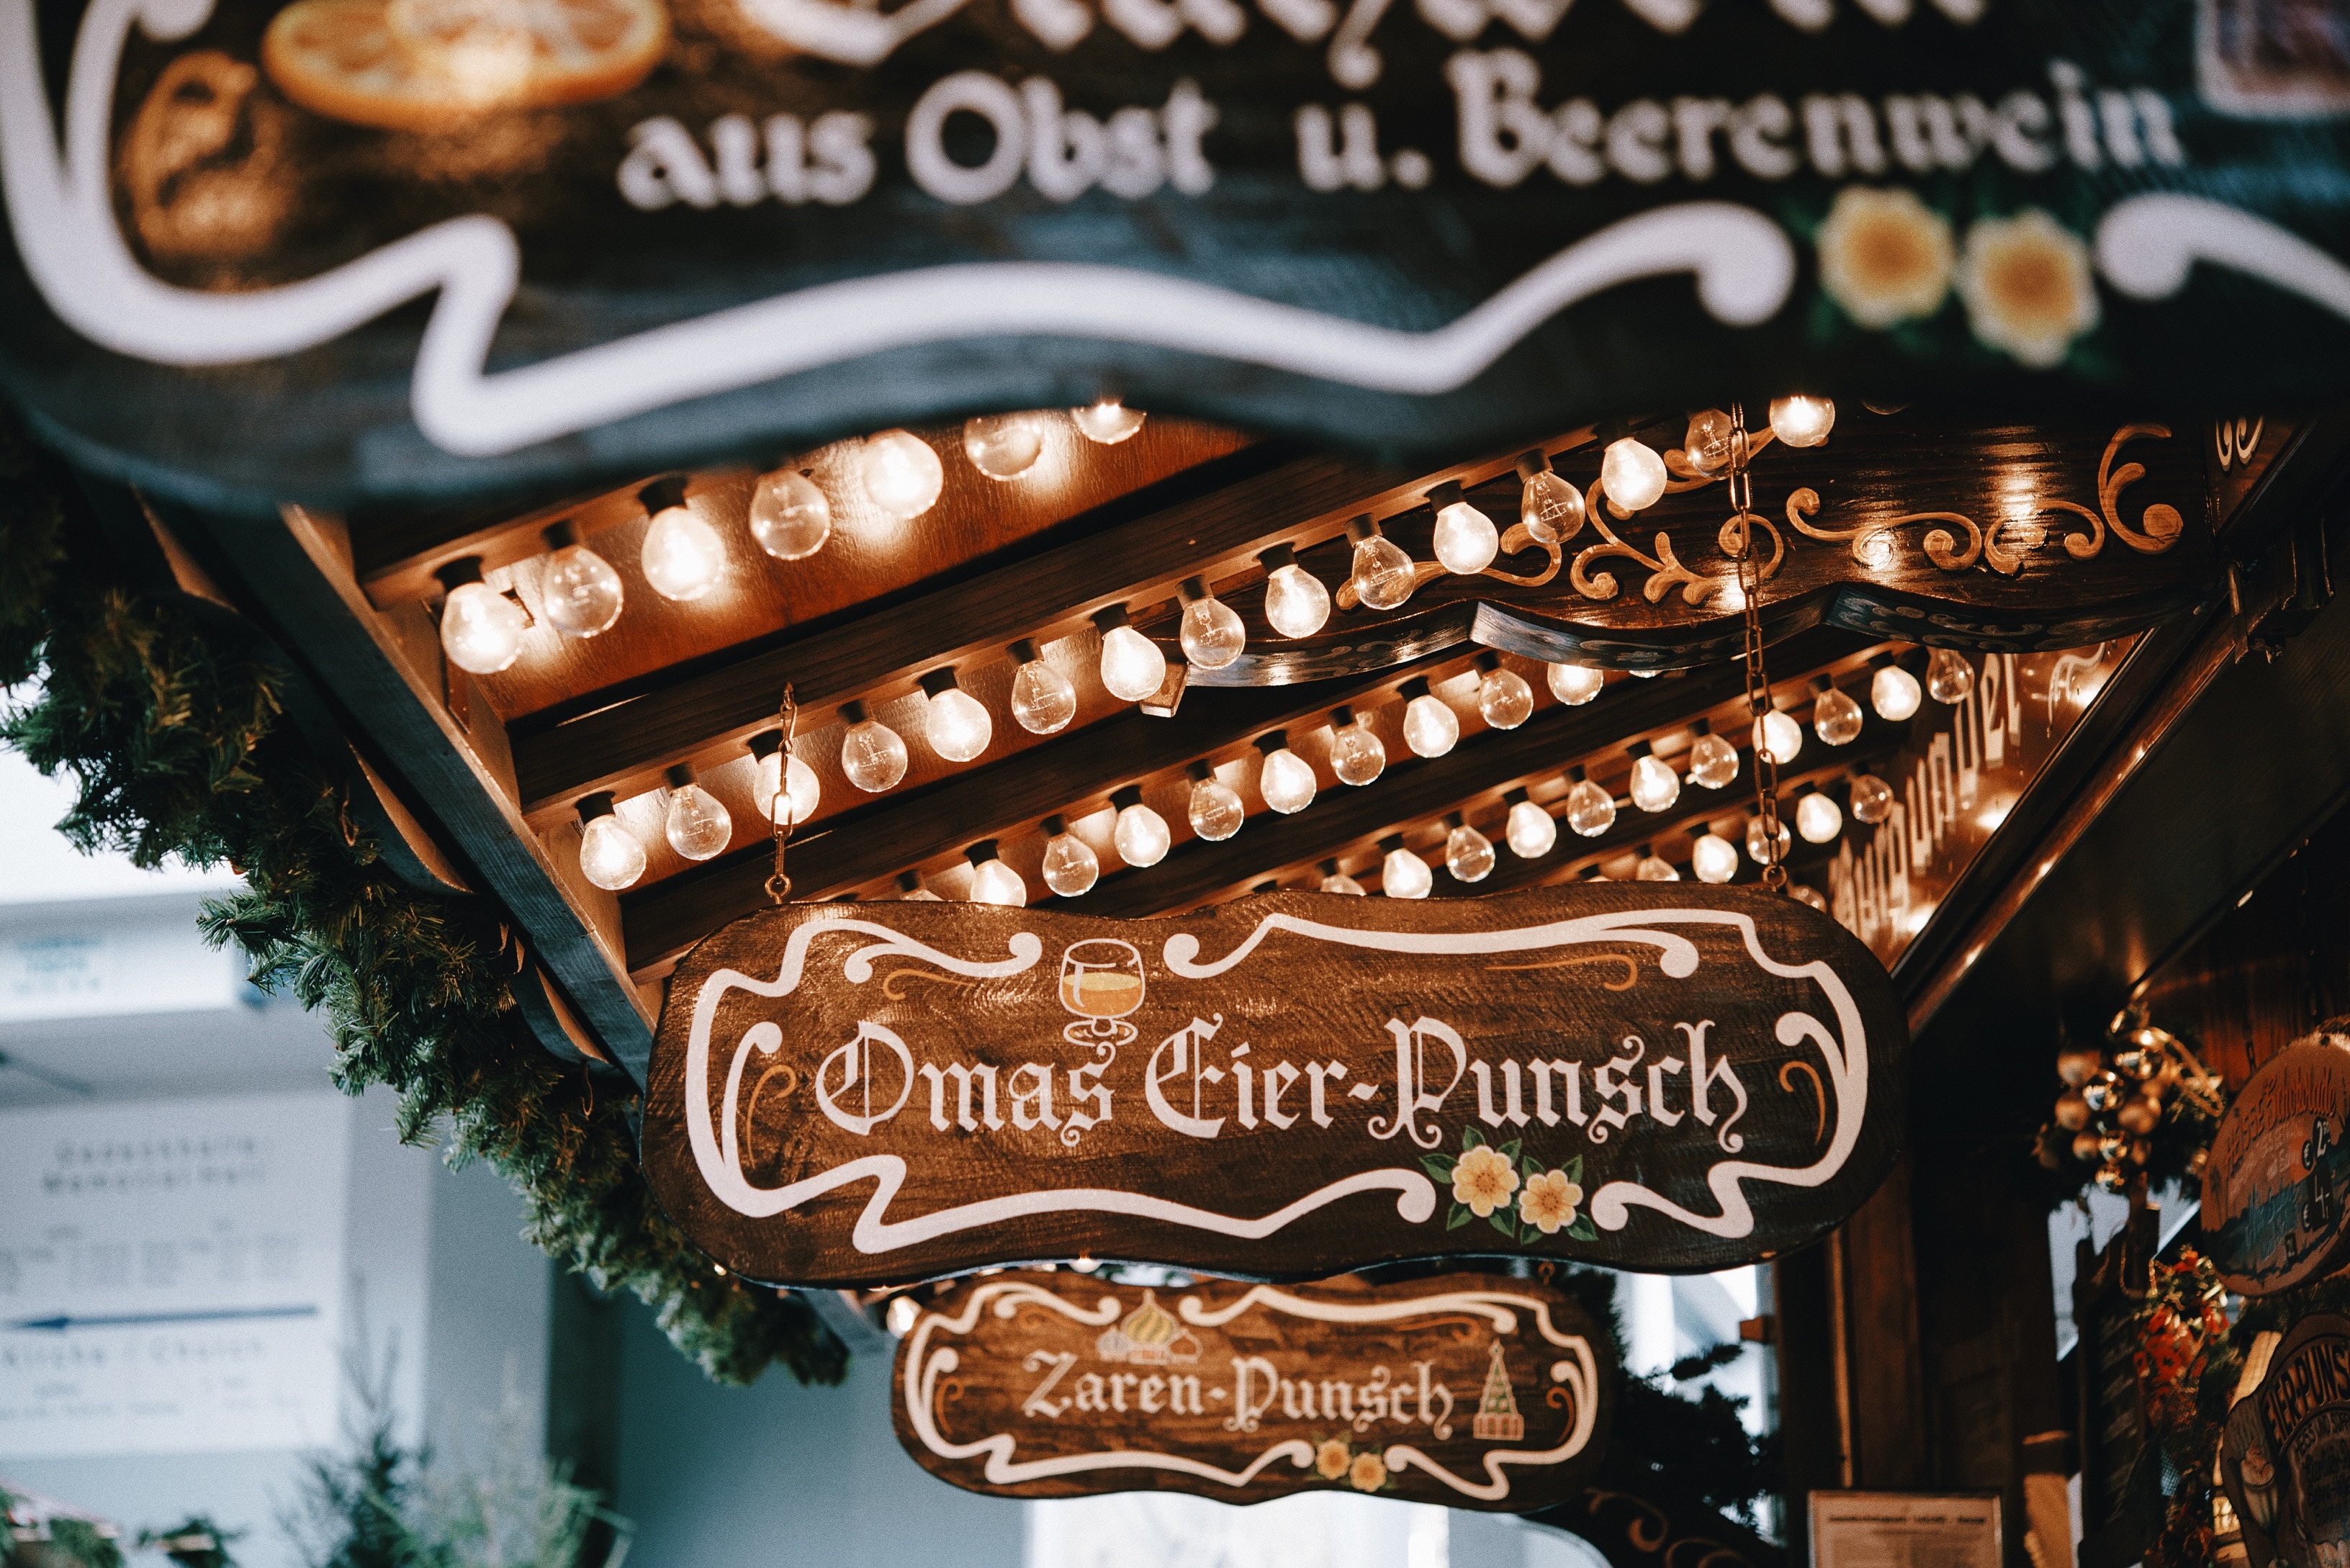 Top 10 Christmas Markets in Europe that YULE want to visit!